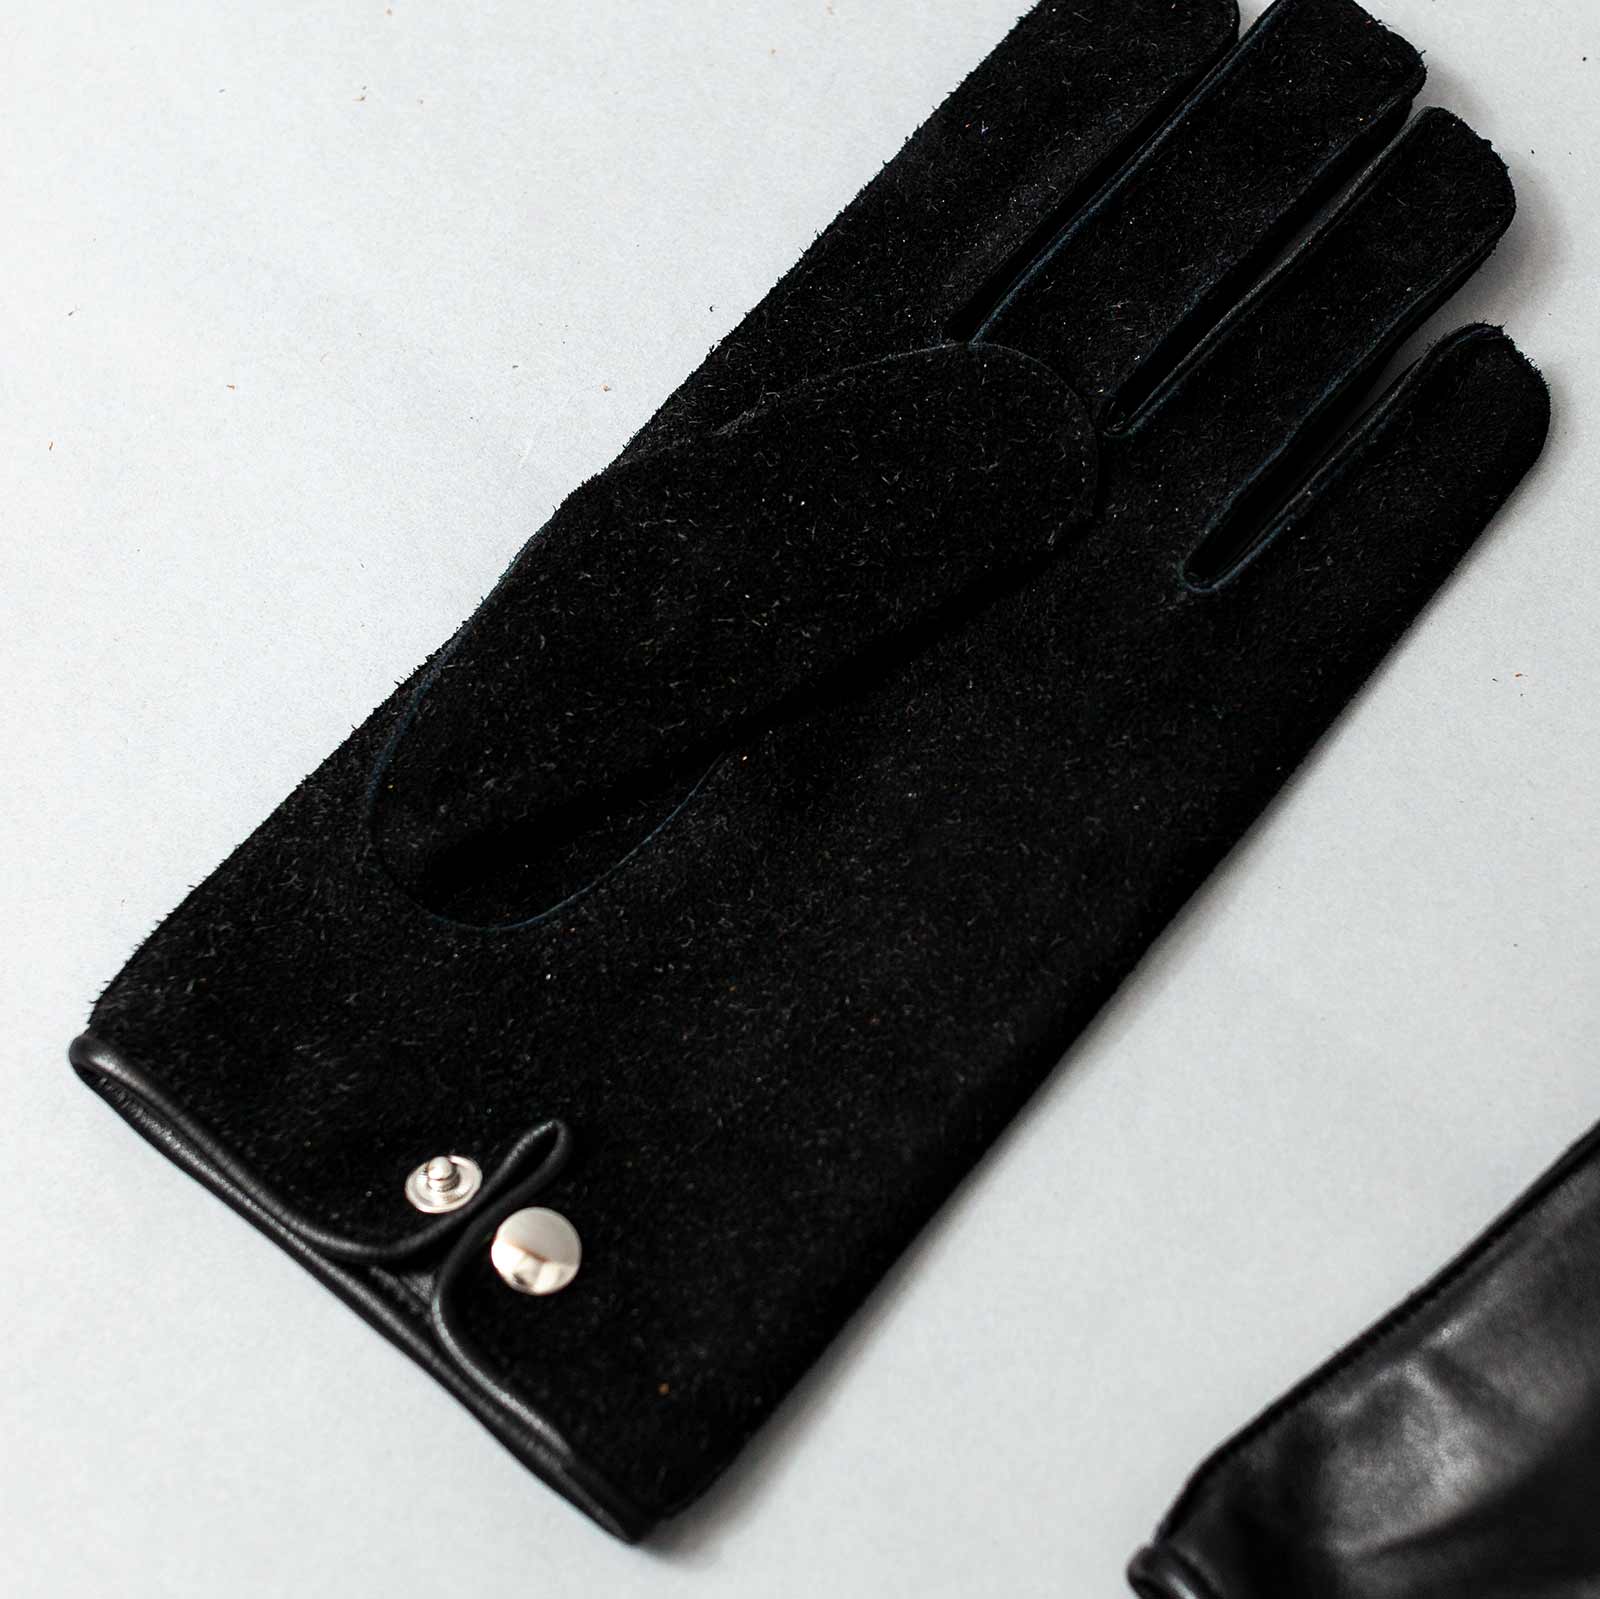 washable leather gloves cycle